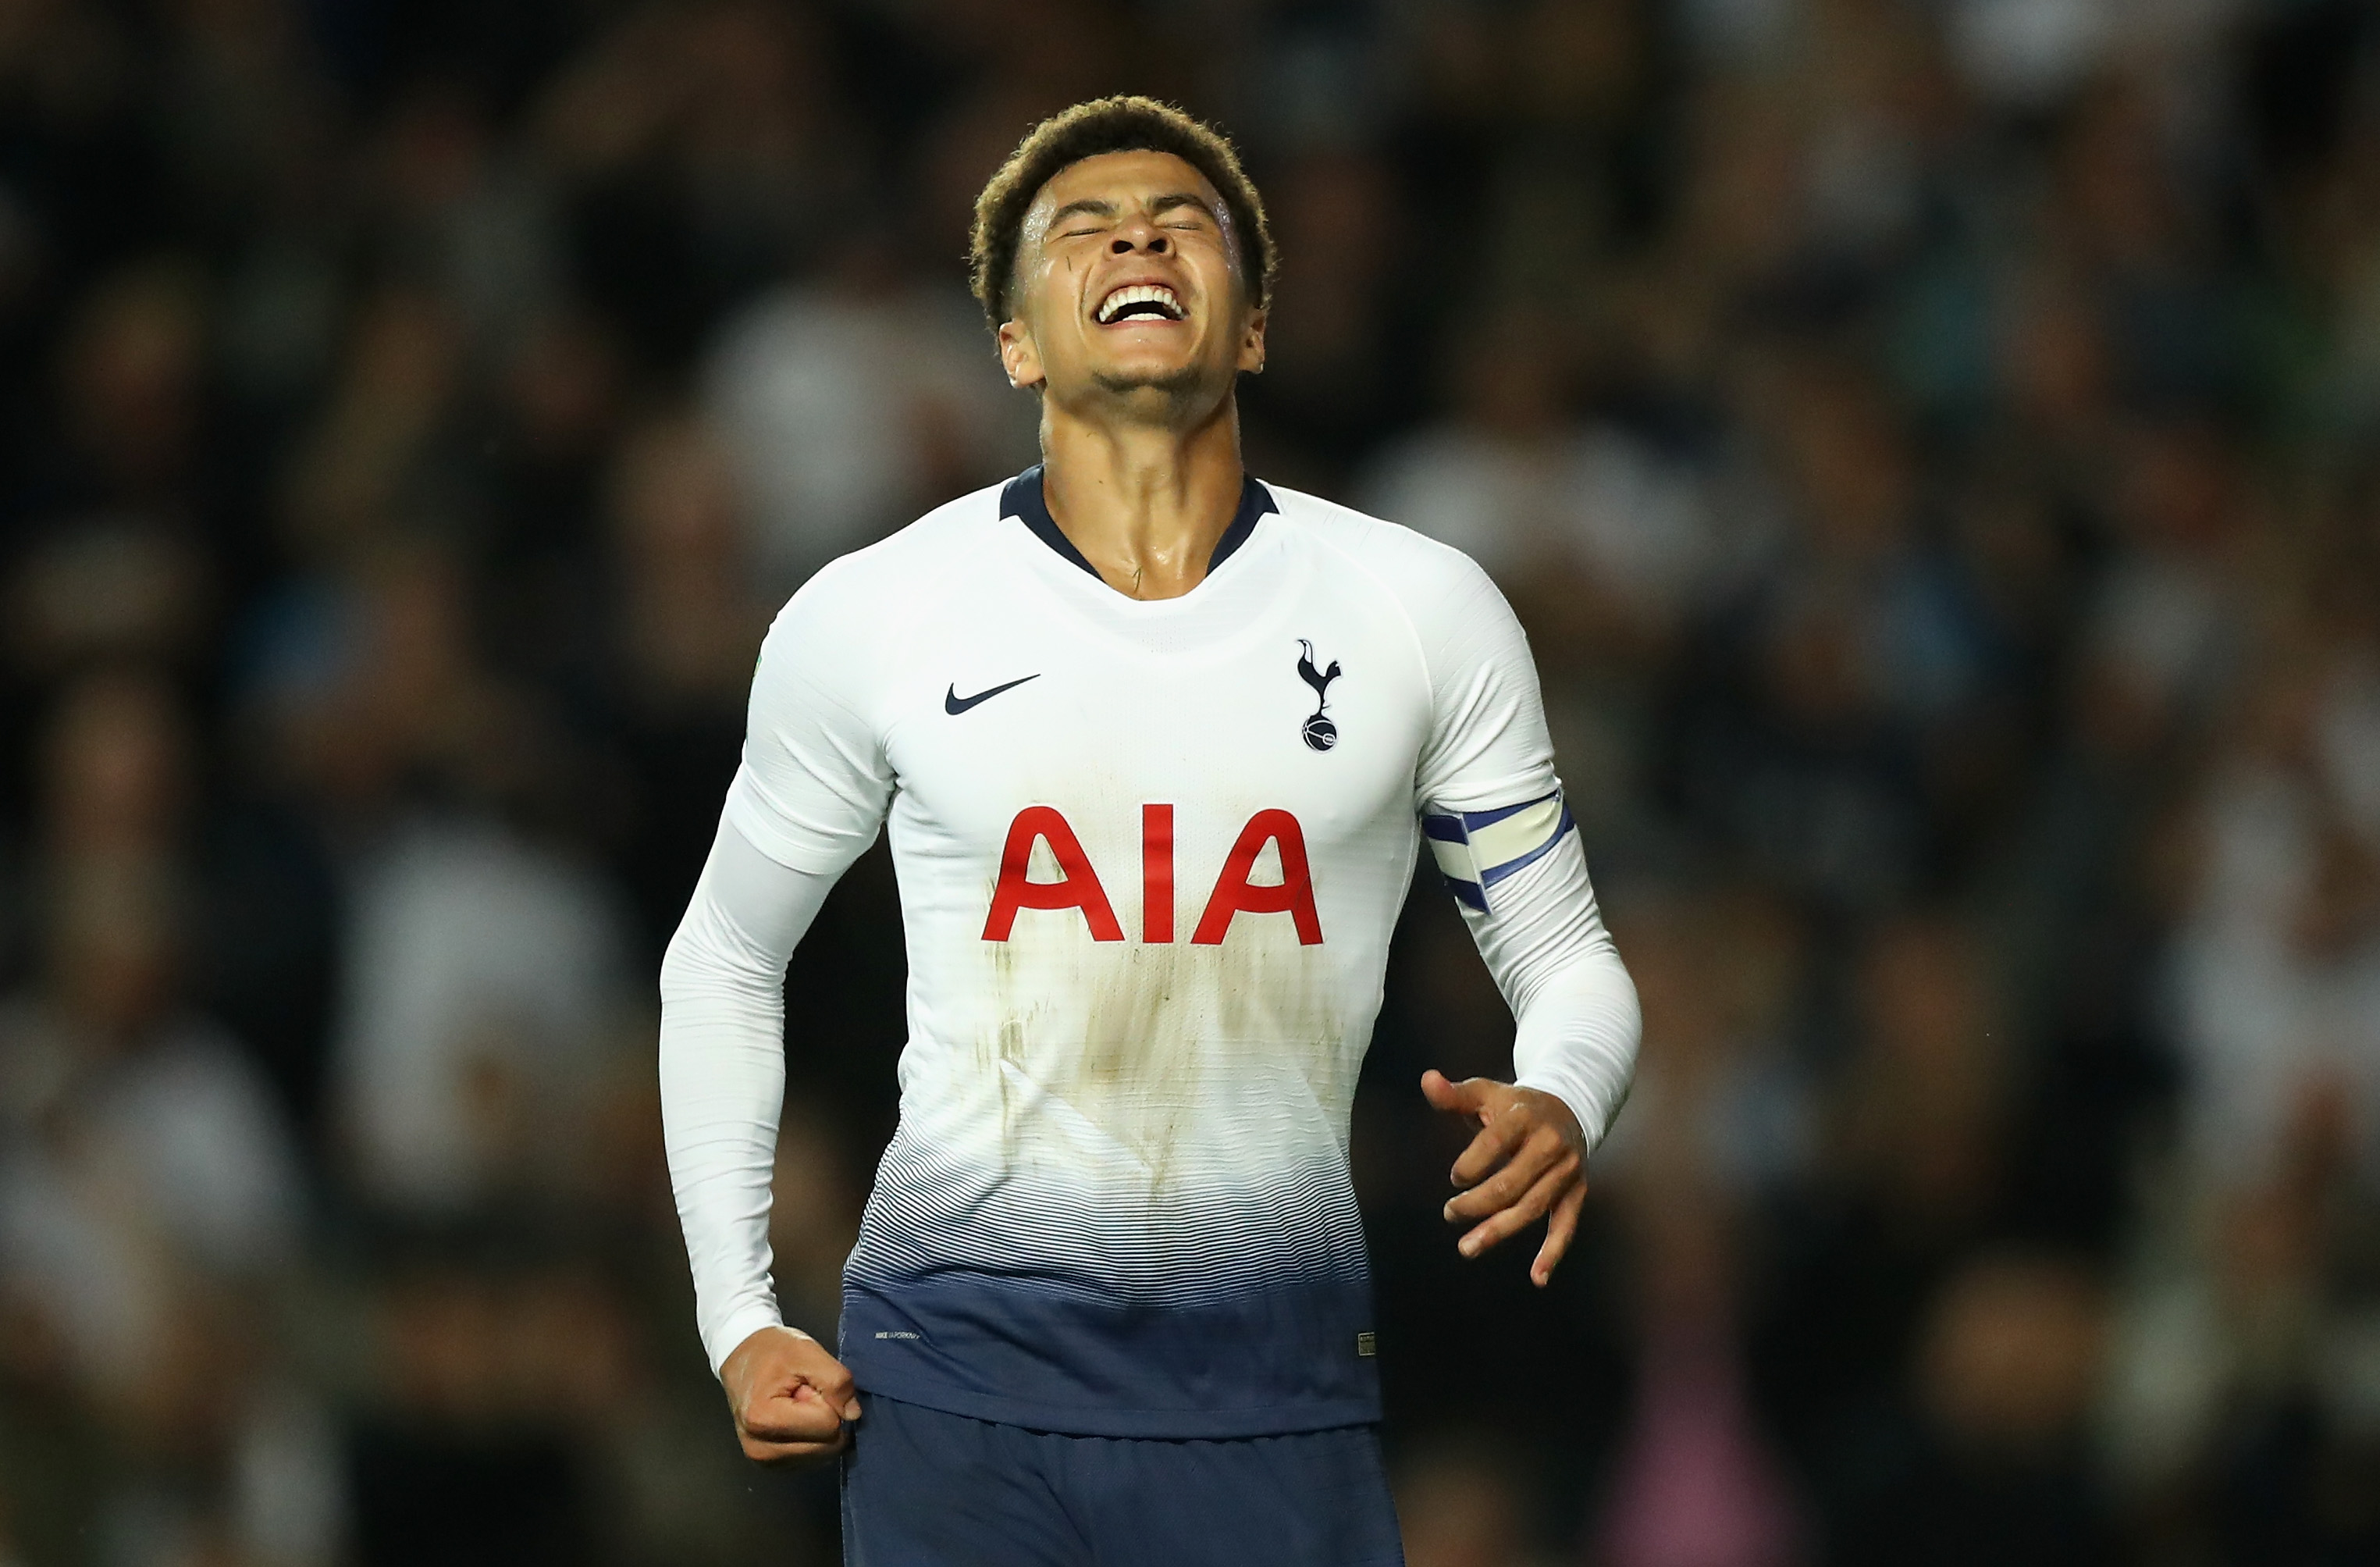 Dele Alli is likely to return to the Tottenham side after his injury lay off. (Photo courtesy: AFP/Getty)